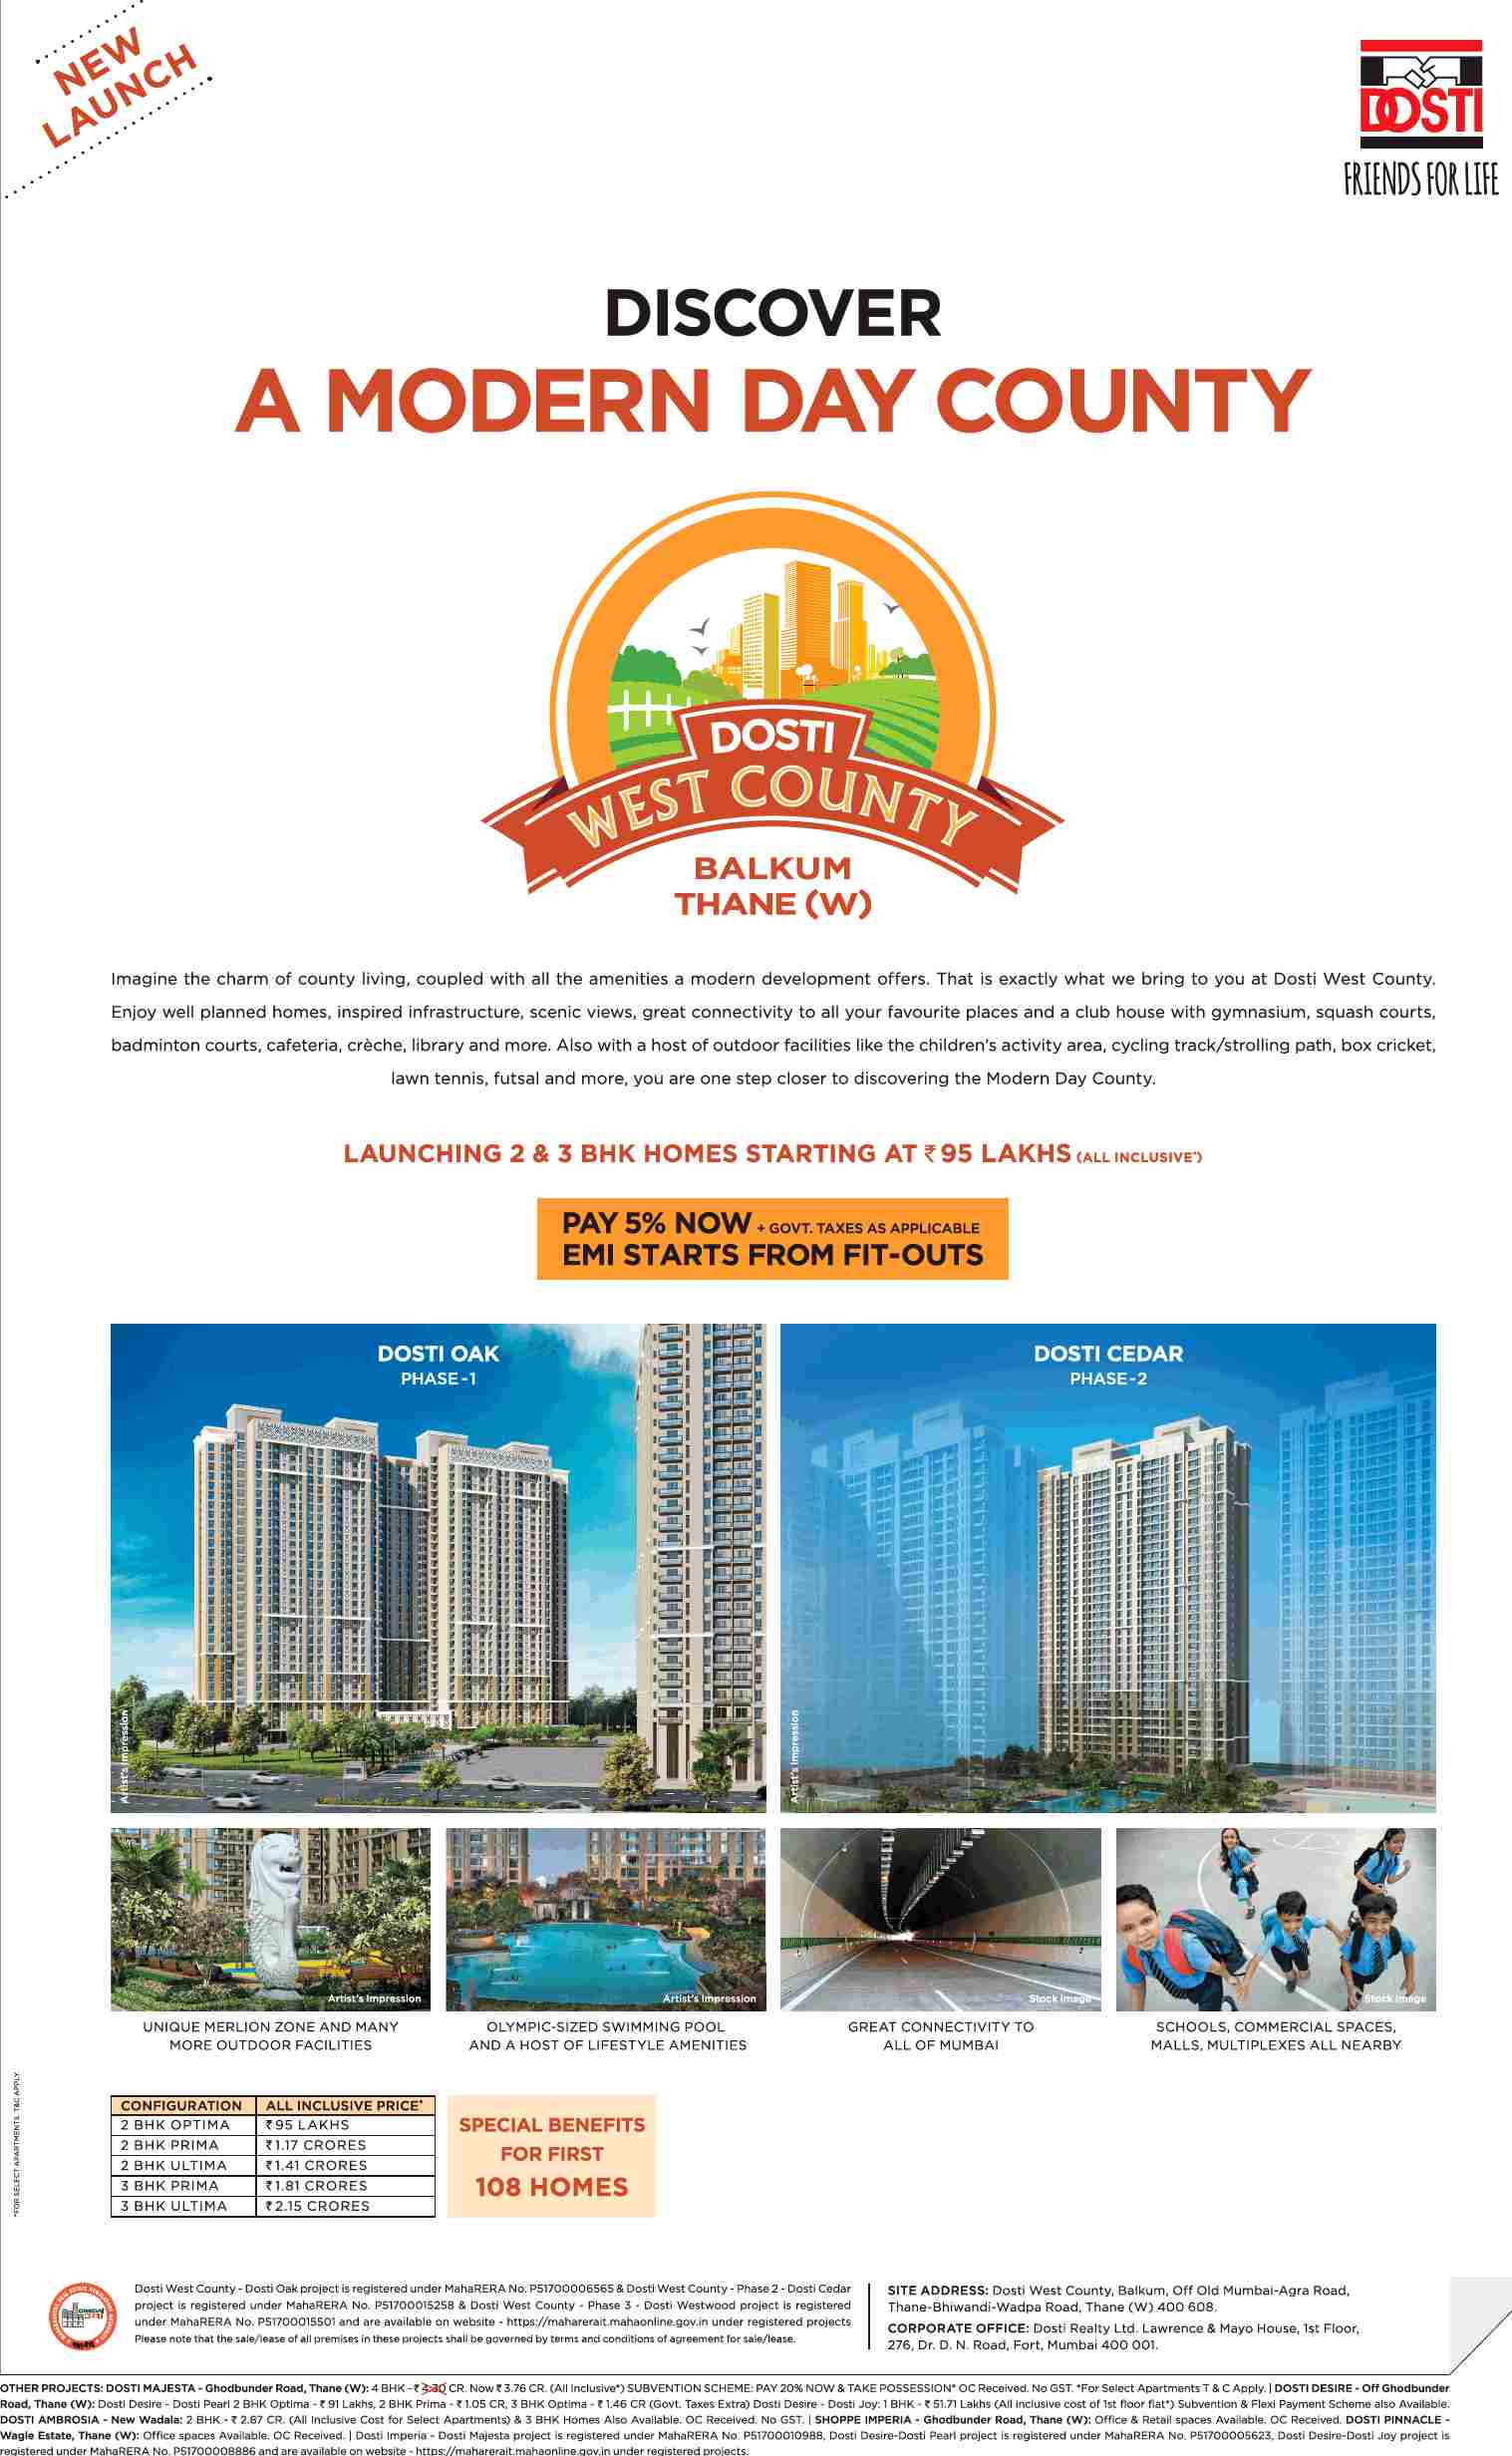 Launching 2 & 3 BHK homes starting at Rs. 95 Lakhs at Dosti West County in Mumbai Update